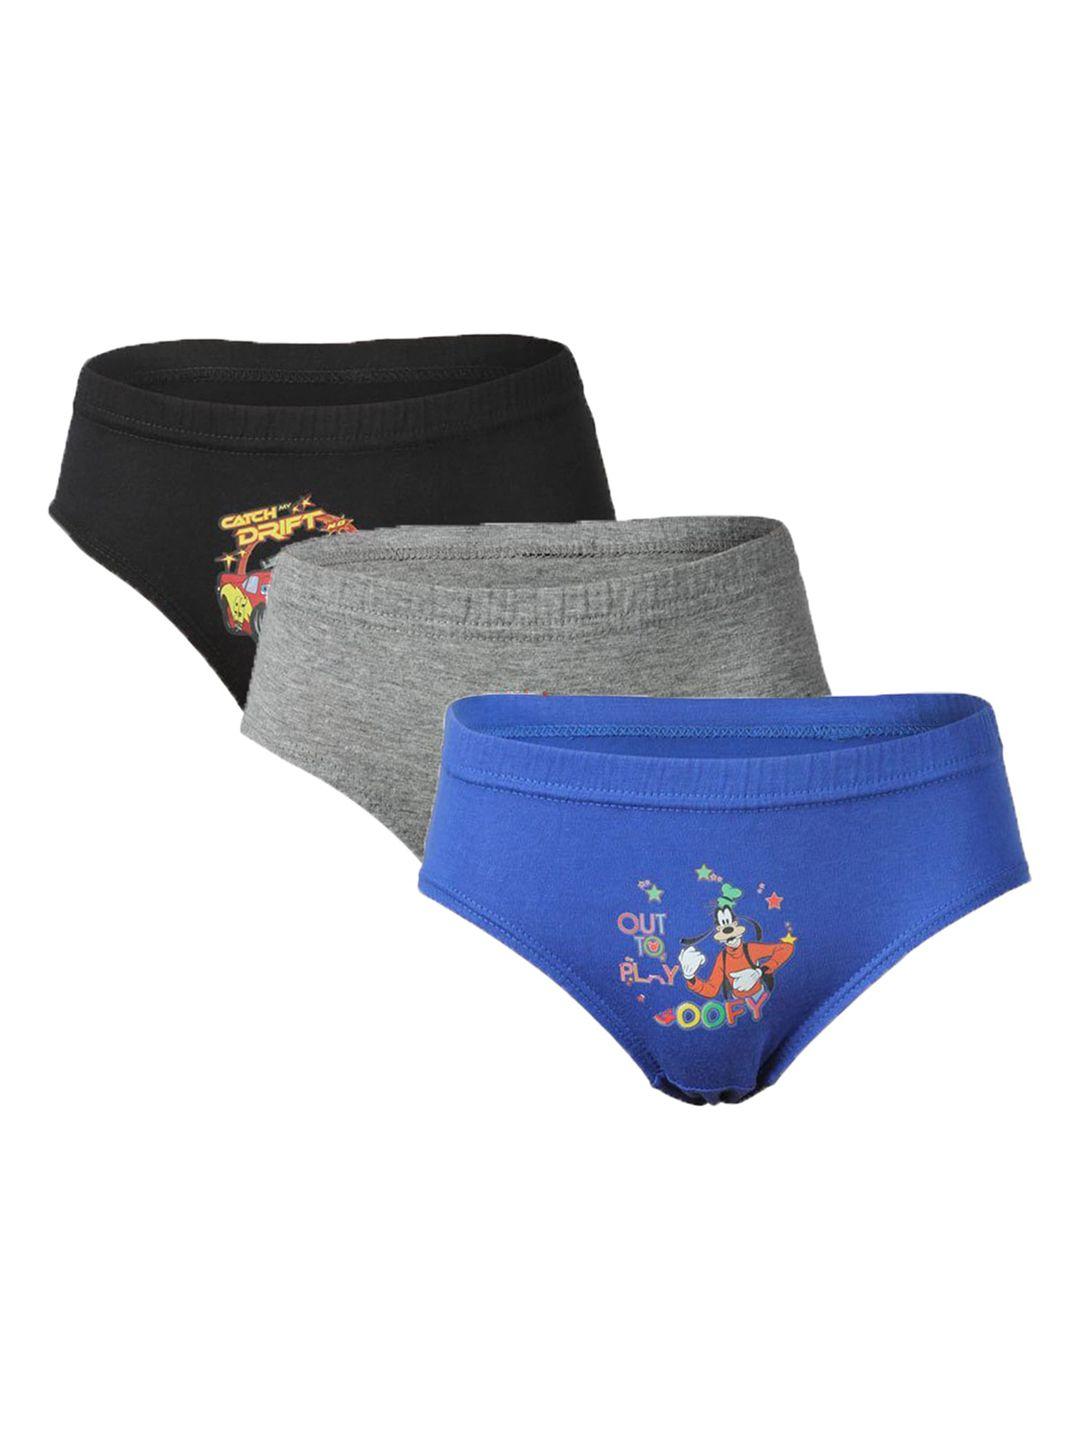 bodycare boys pack of 3 cotton basic briefs